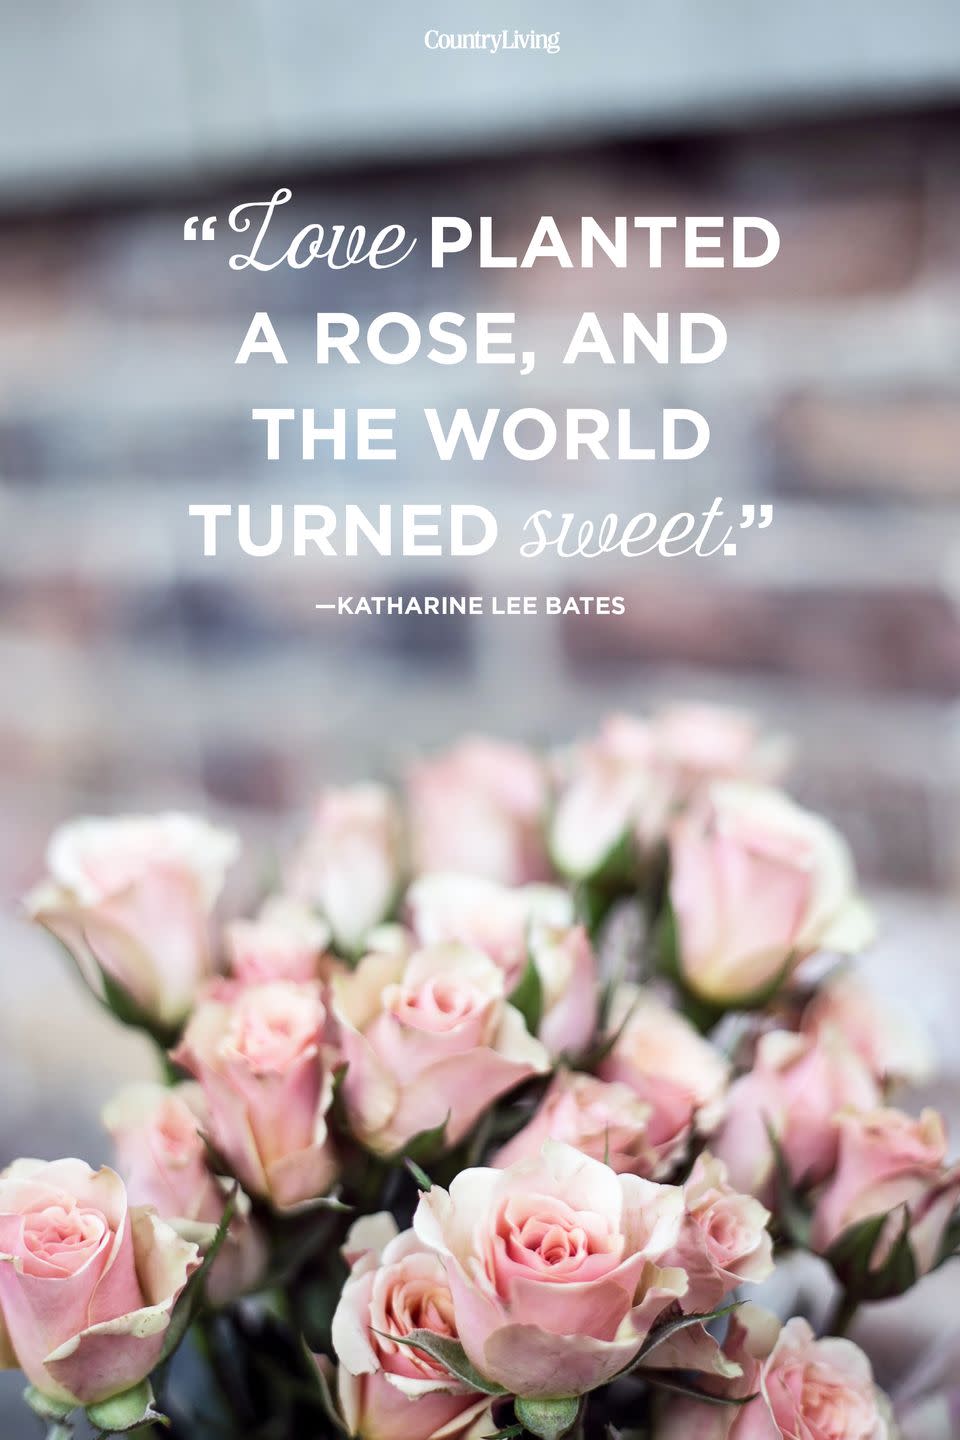 <p>"Love planted a rose, and the world turned sweet."</p>